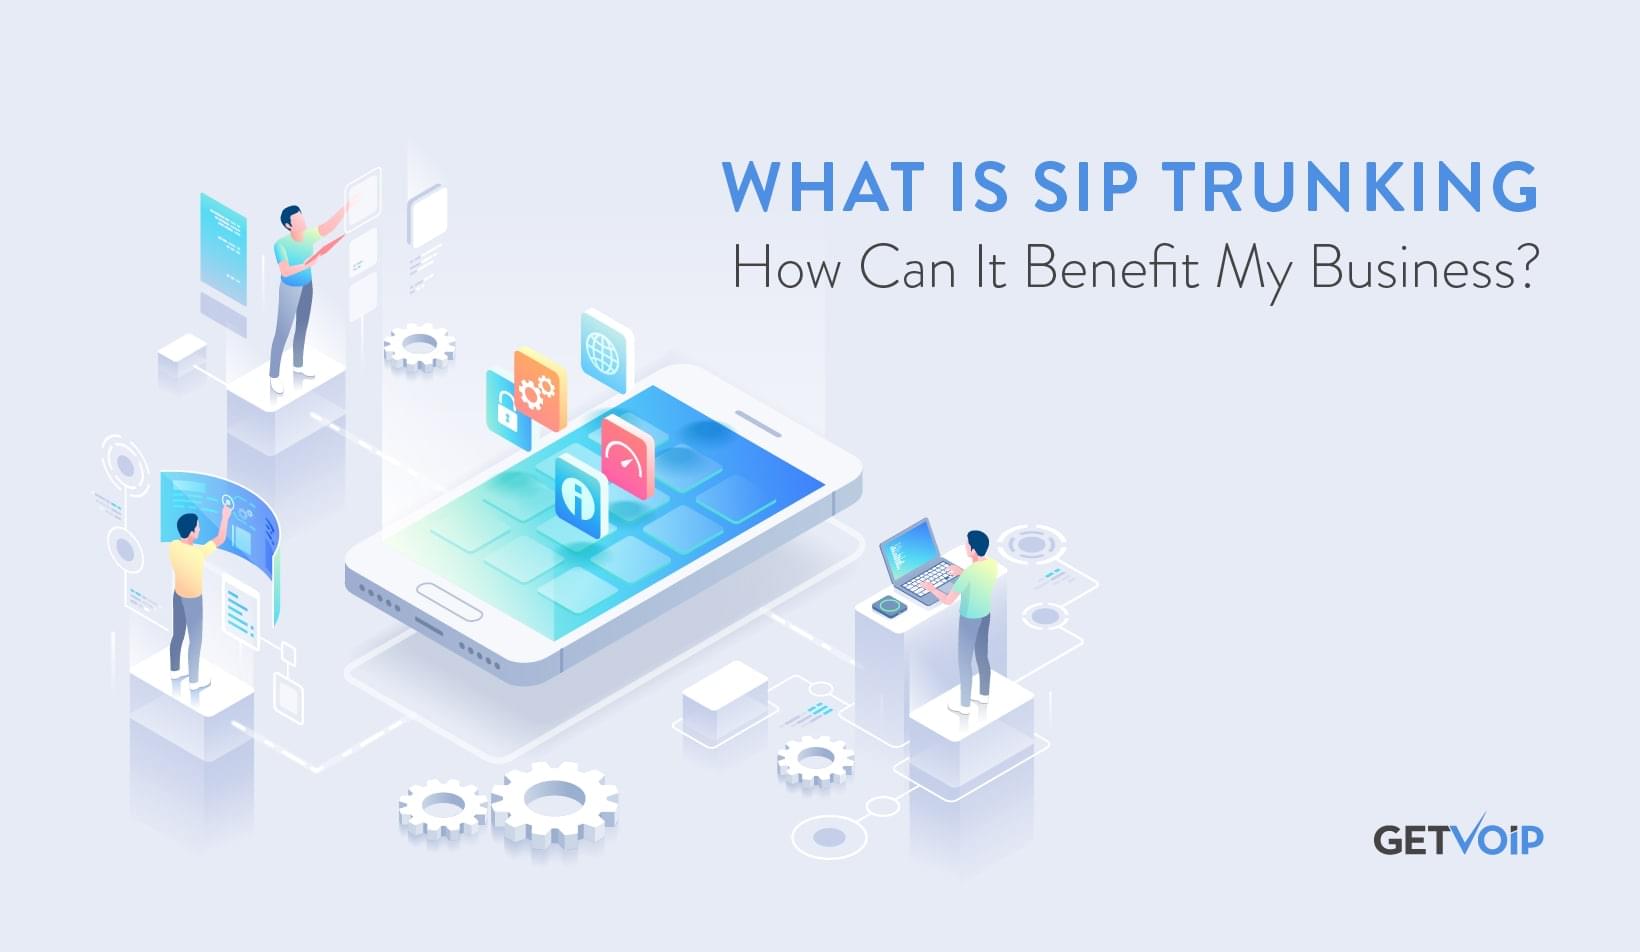 What is SIP Trunking and How Can It Benefit My Business?